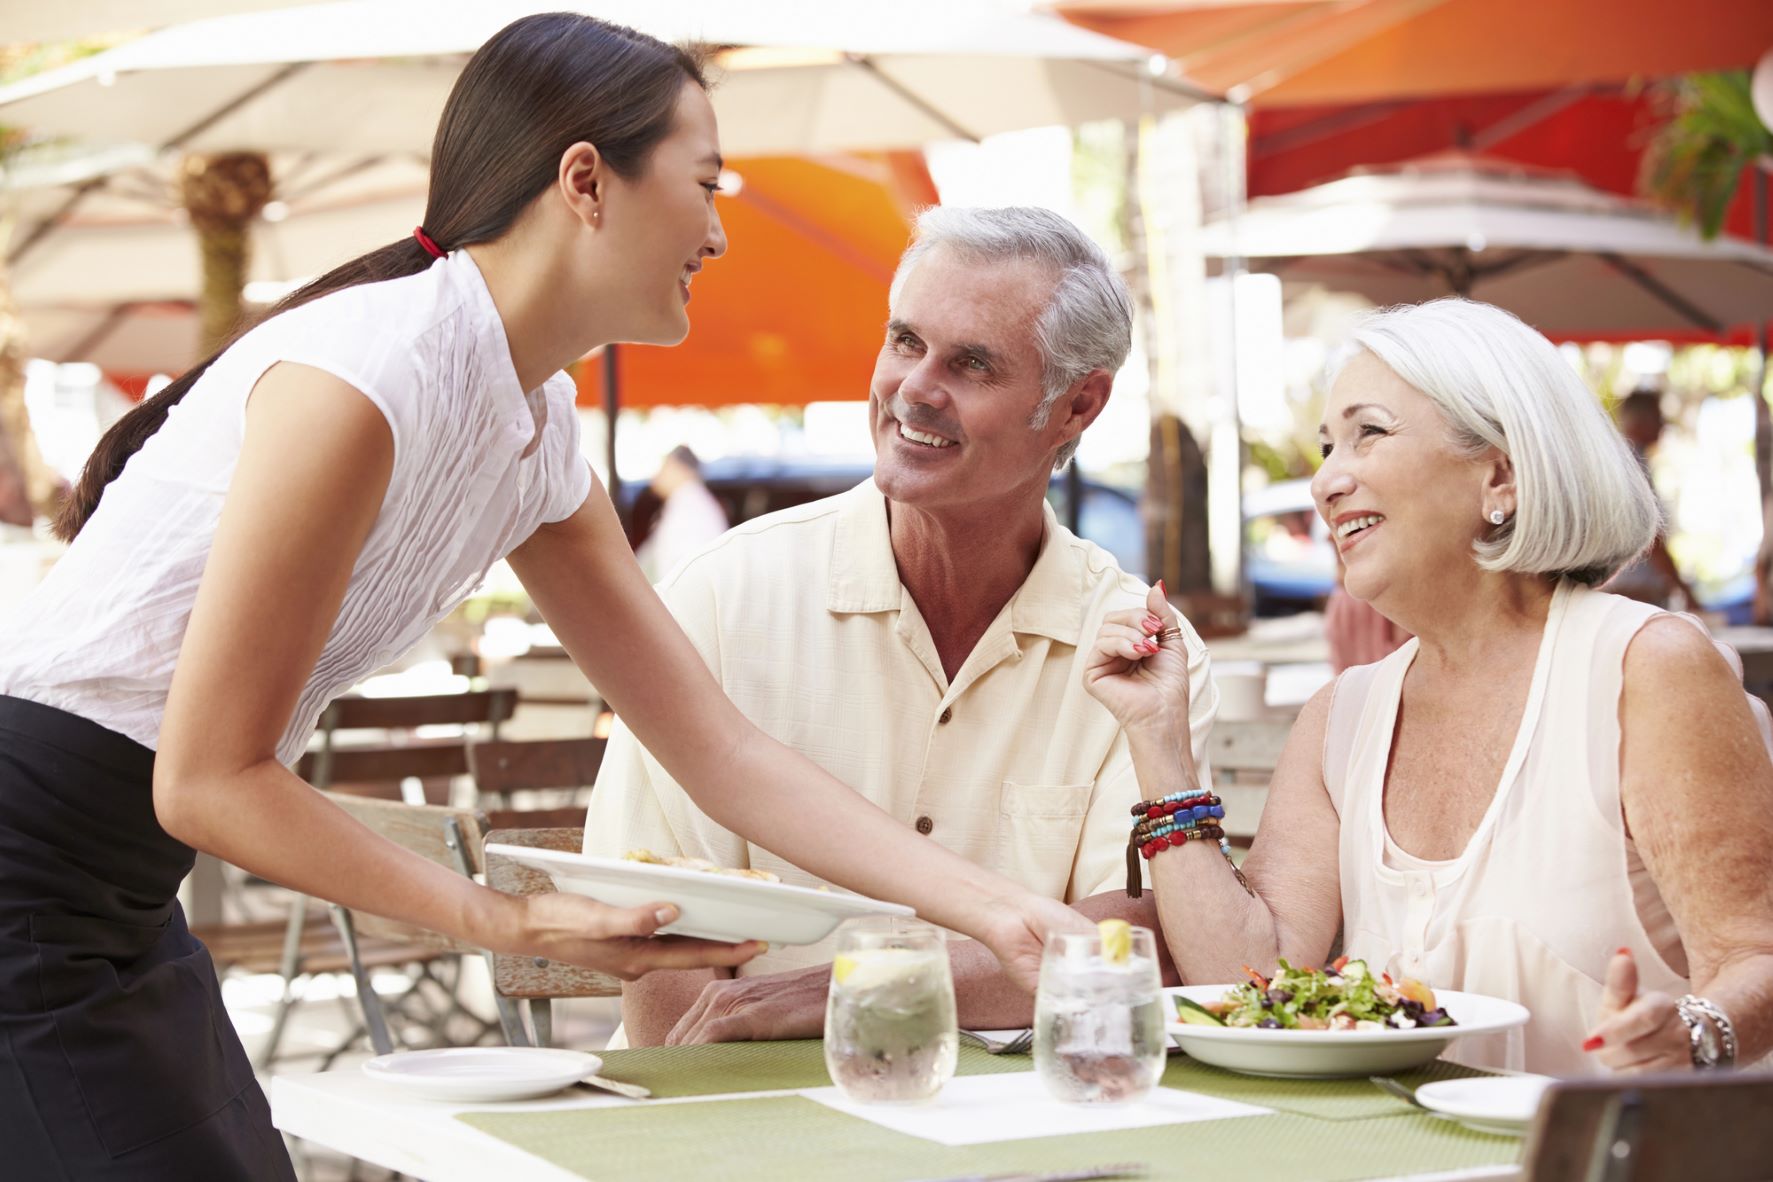 dining-out-is-the-#1-retirement-expense-to-slash,-says-suze-orman